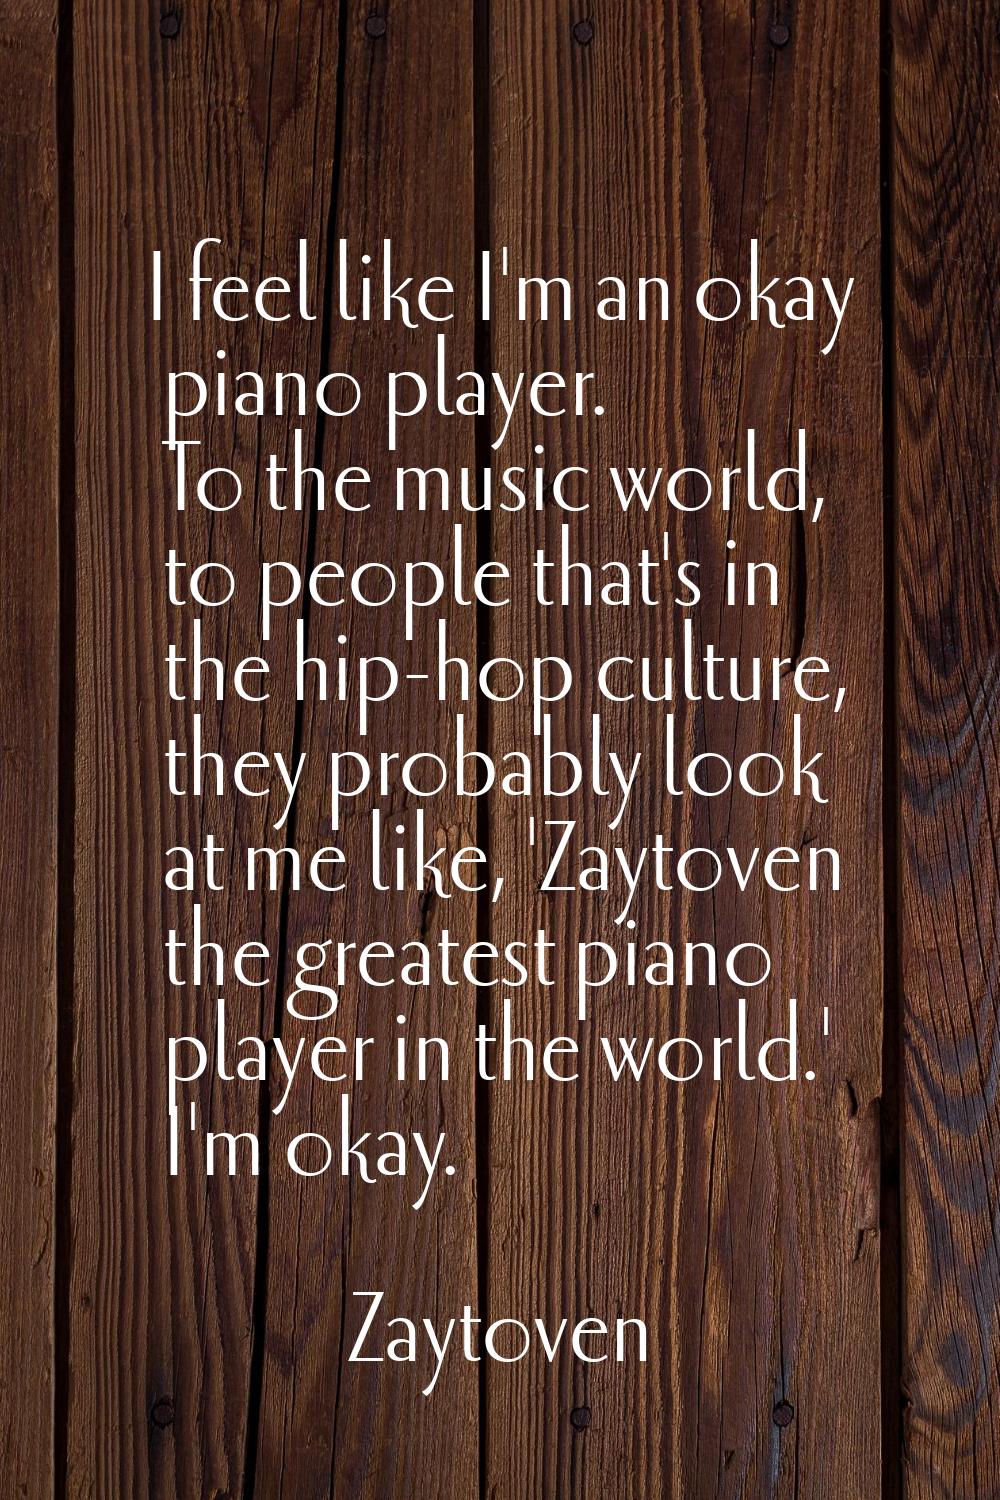 I feel like I'm an okay piano player. To the music world, to people that's in the hip-hop culture, 